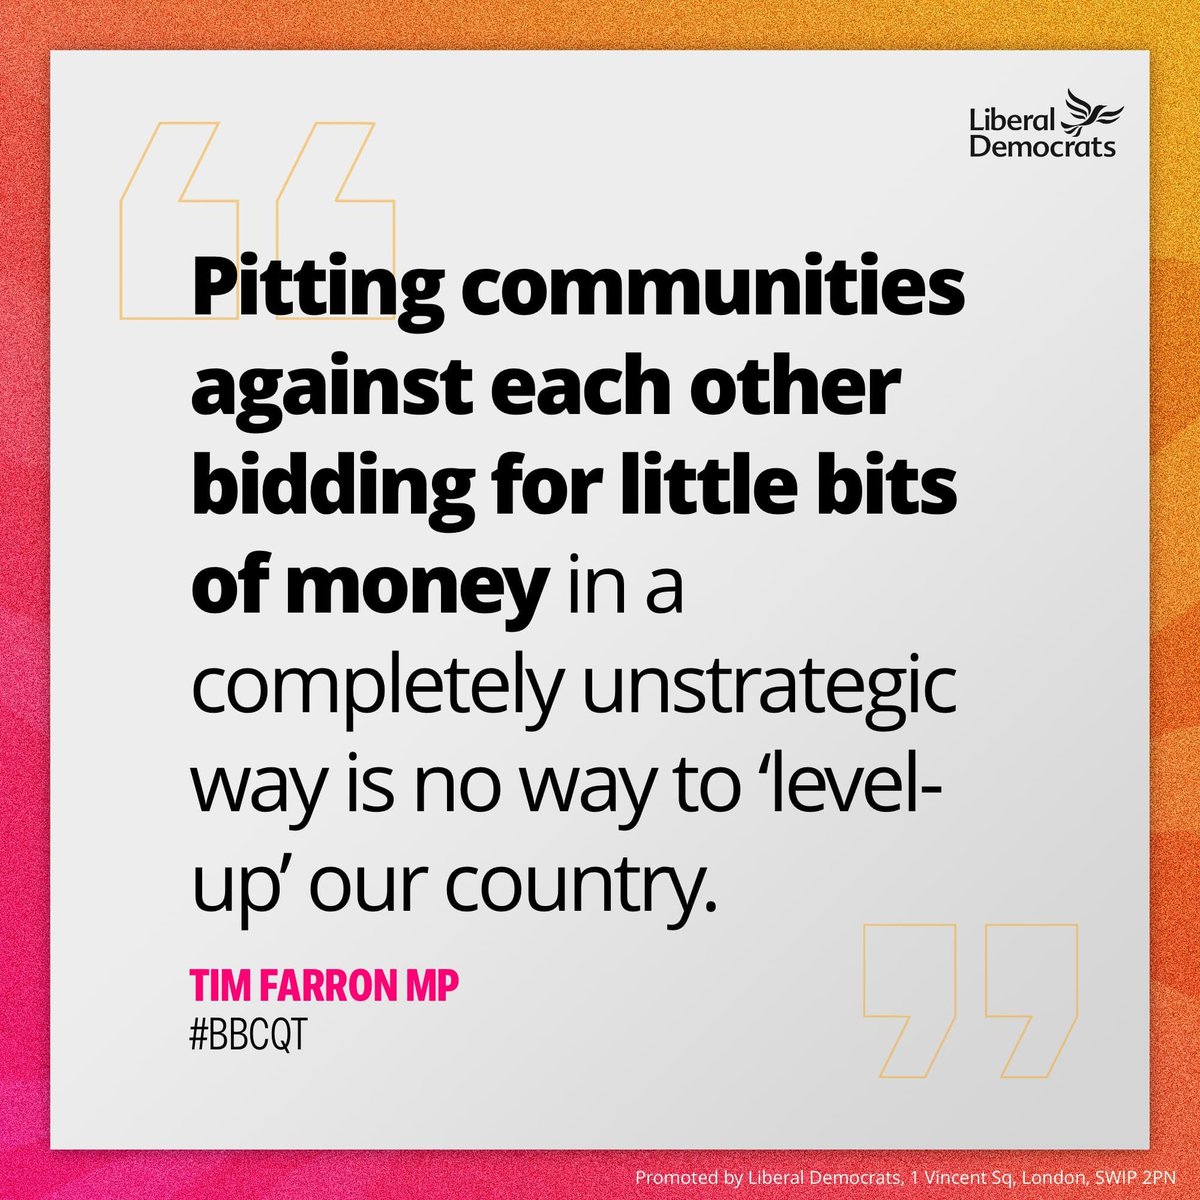 'Pitting communities against each other bidding for little bits of money in a completely unstrategic way is no way to ‘level-up’ our country. 'We need to invest in real infrastructure between these towns.' @timfarron #BBCQT